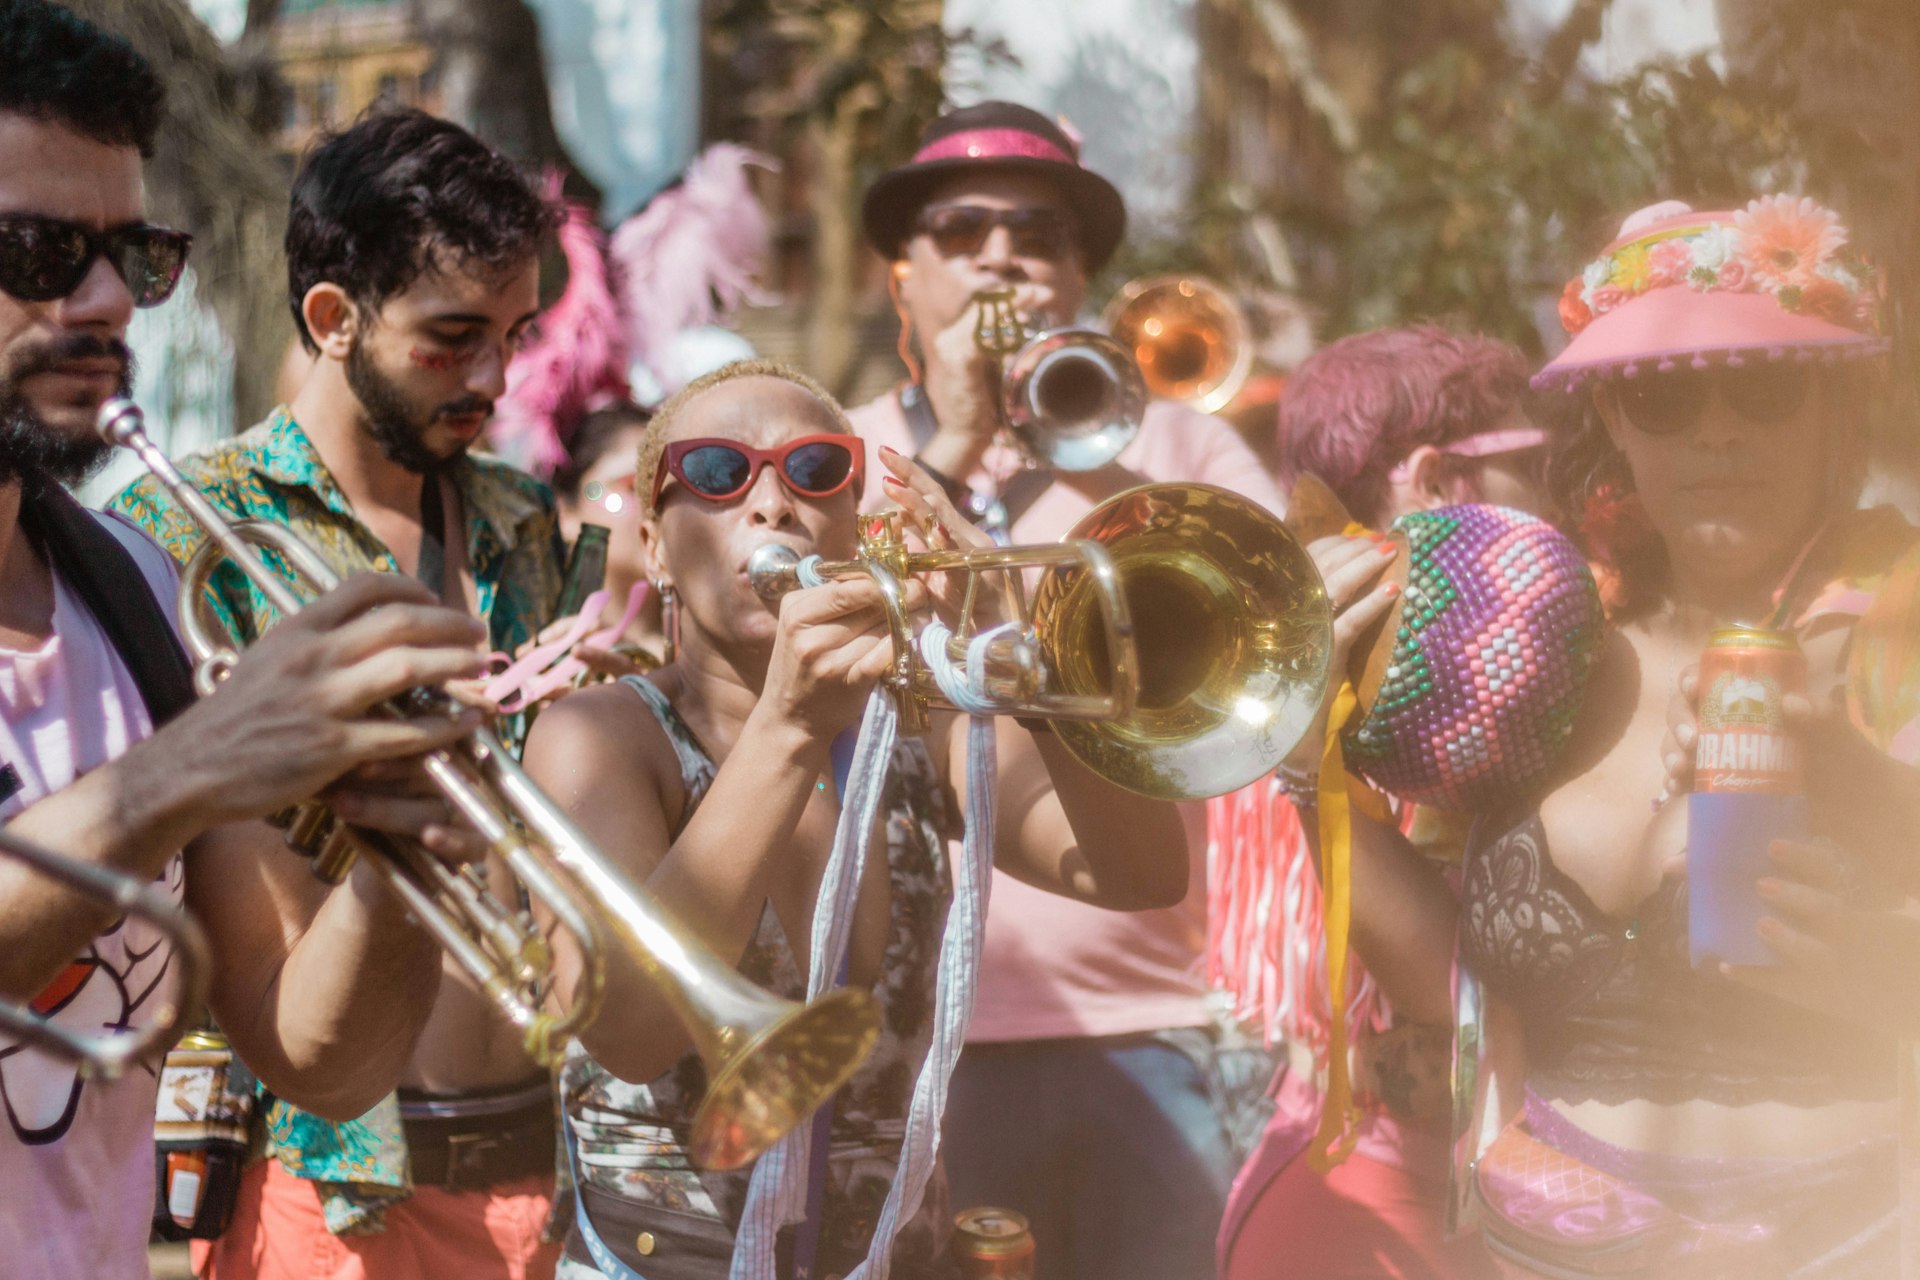 Musicians playing brass instruments on a sunny day, with a hazy effect giving a dreamy quality to a street carnival scene filled with colorful attire.